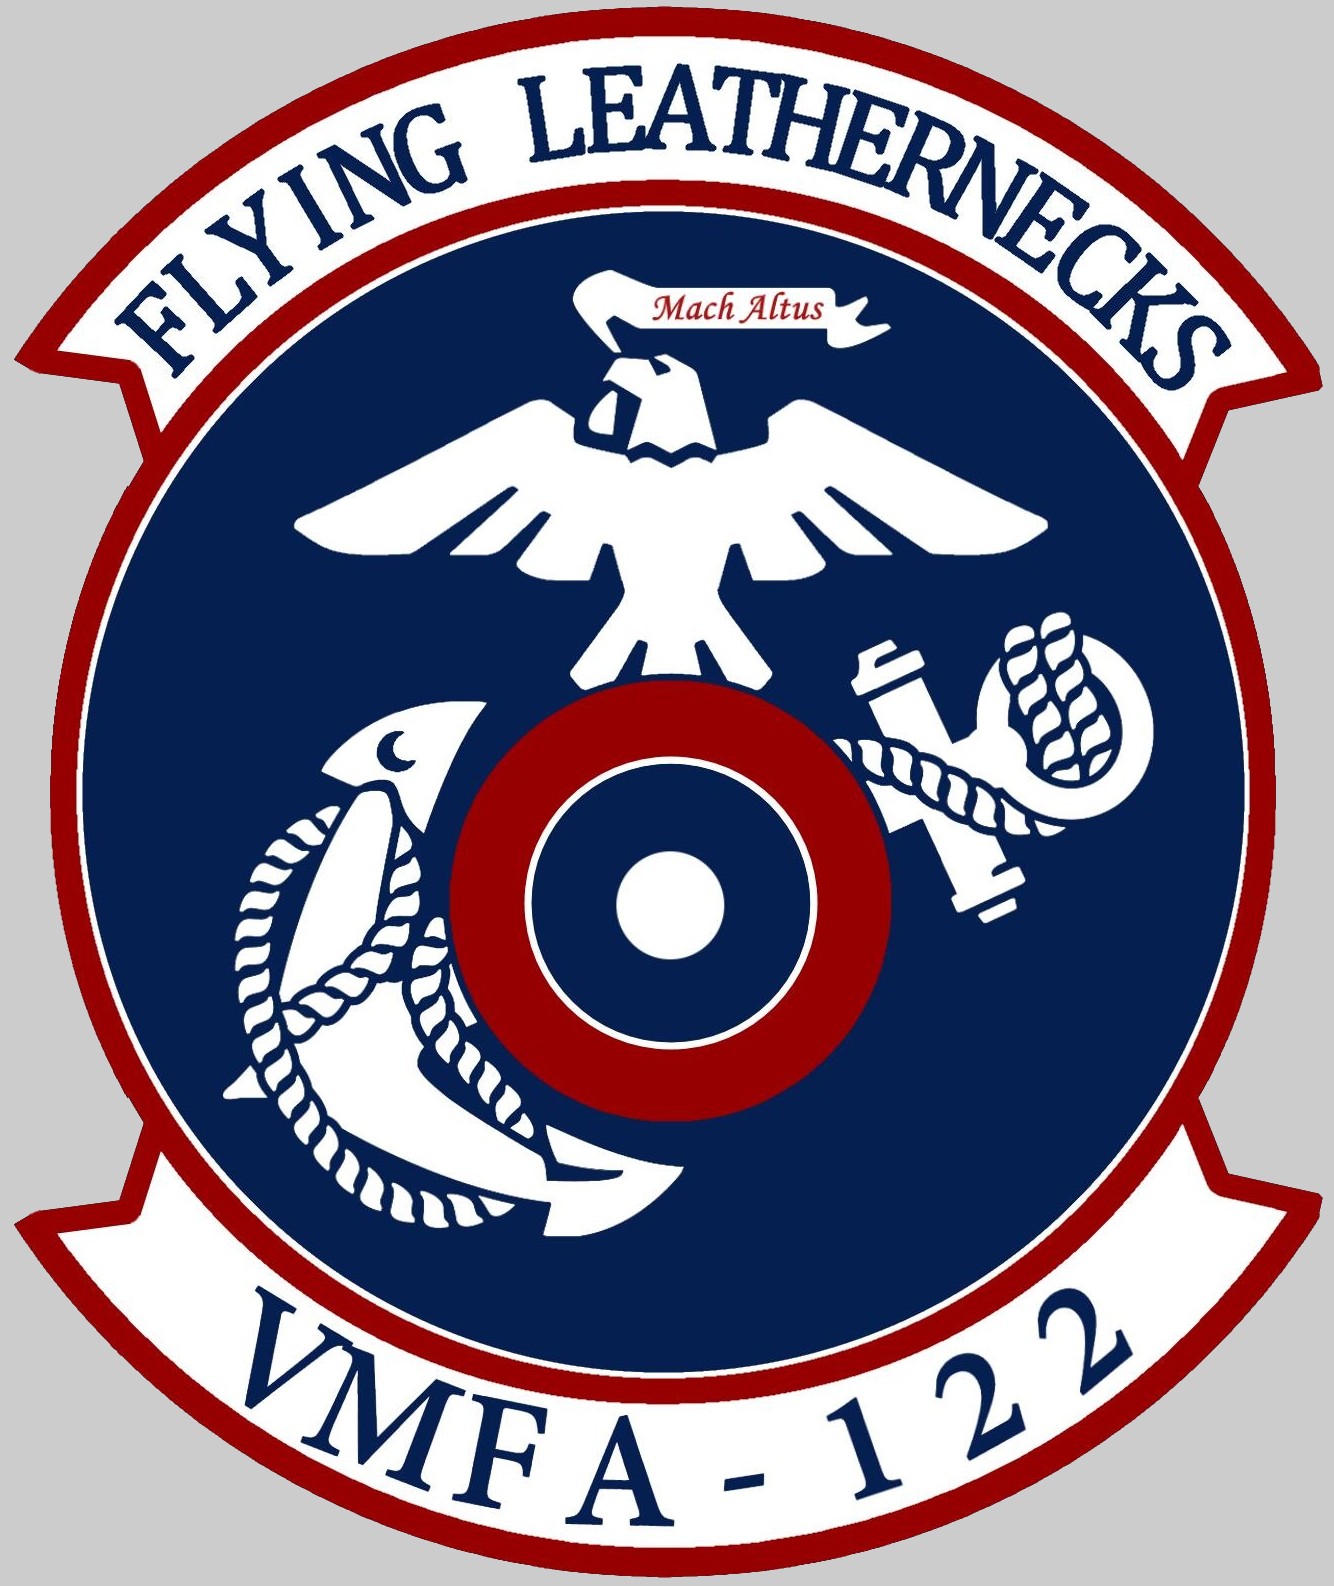 vmfa-122 flying leathernecks insignia crest patch badge marine fighter attack squadron 02x